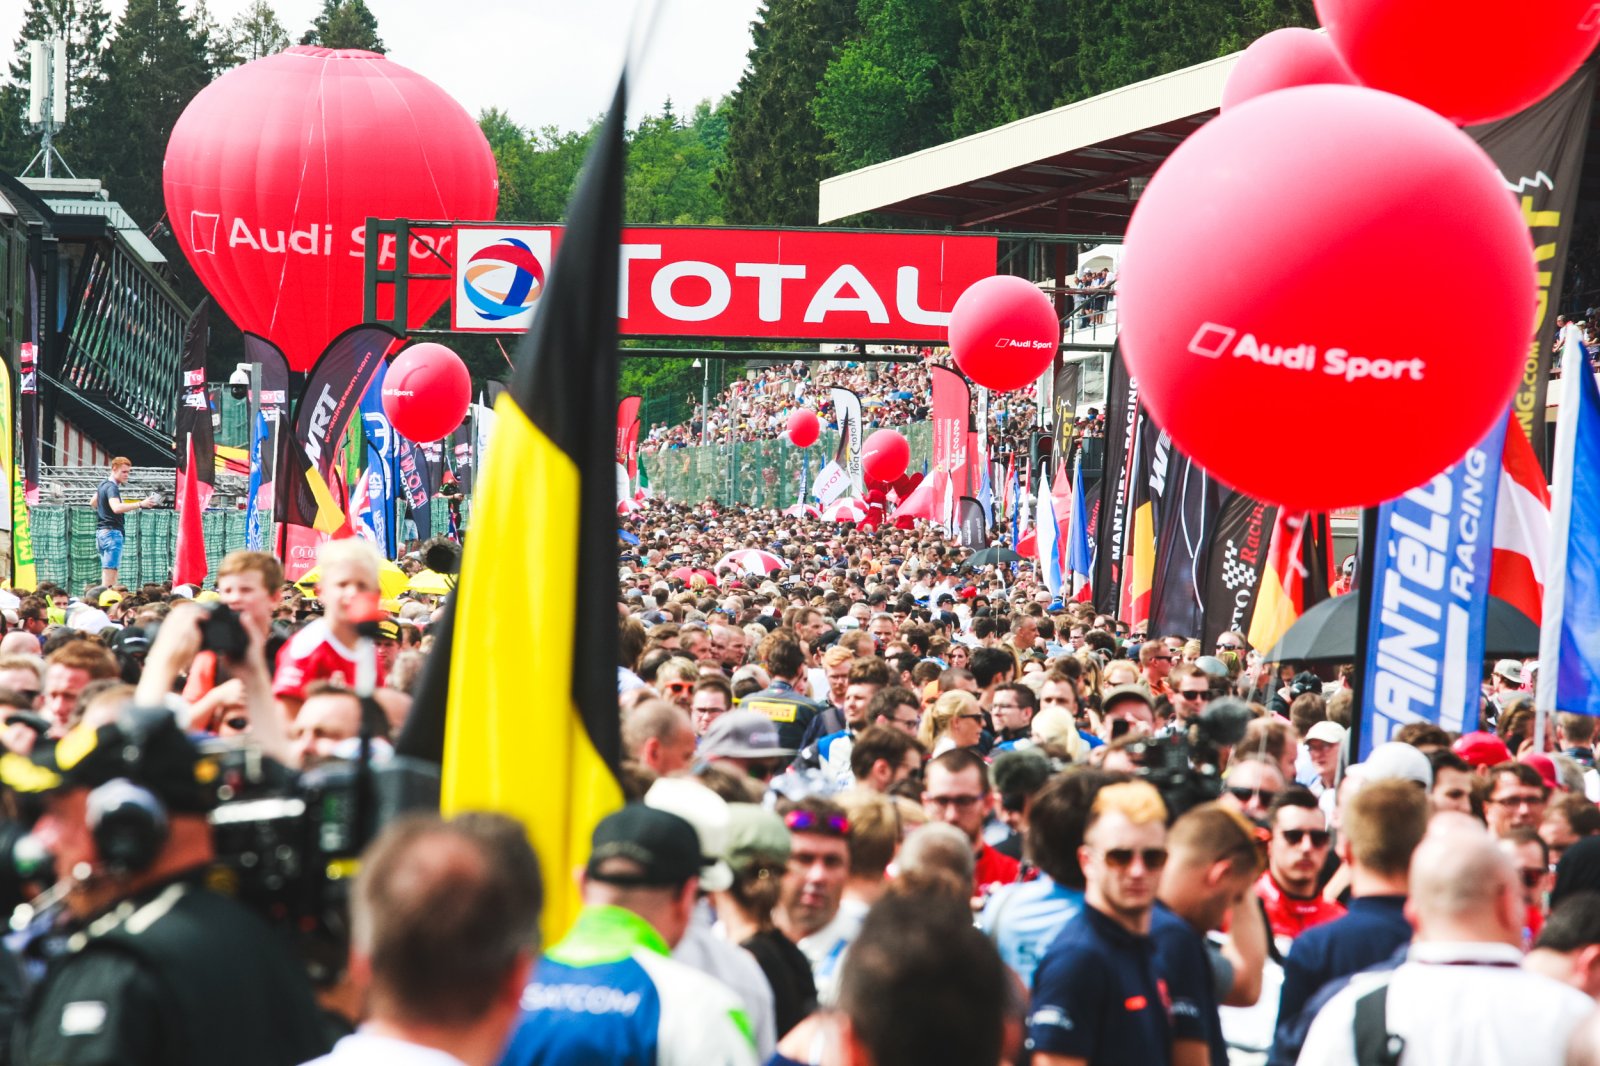 Stars of international GT racing prepare for battle at the Total 24 Hours of Spa